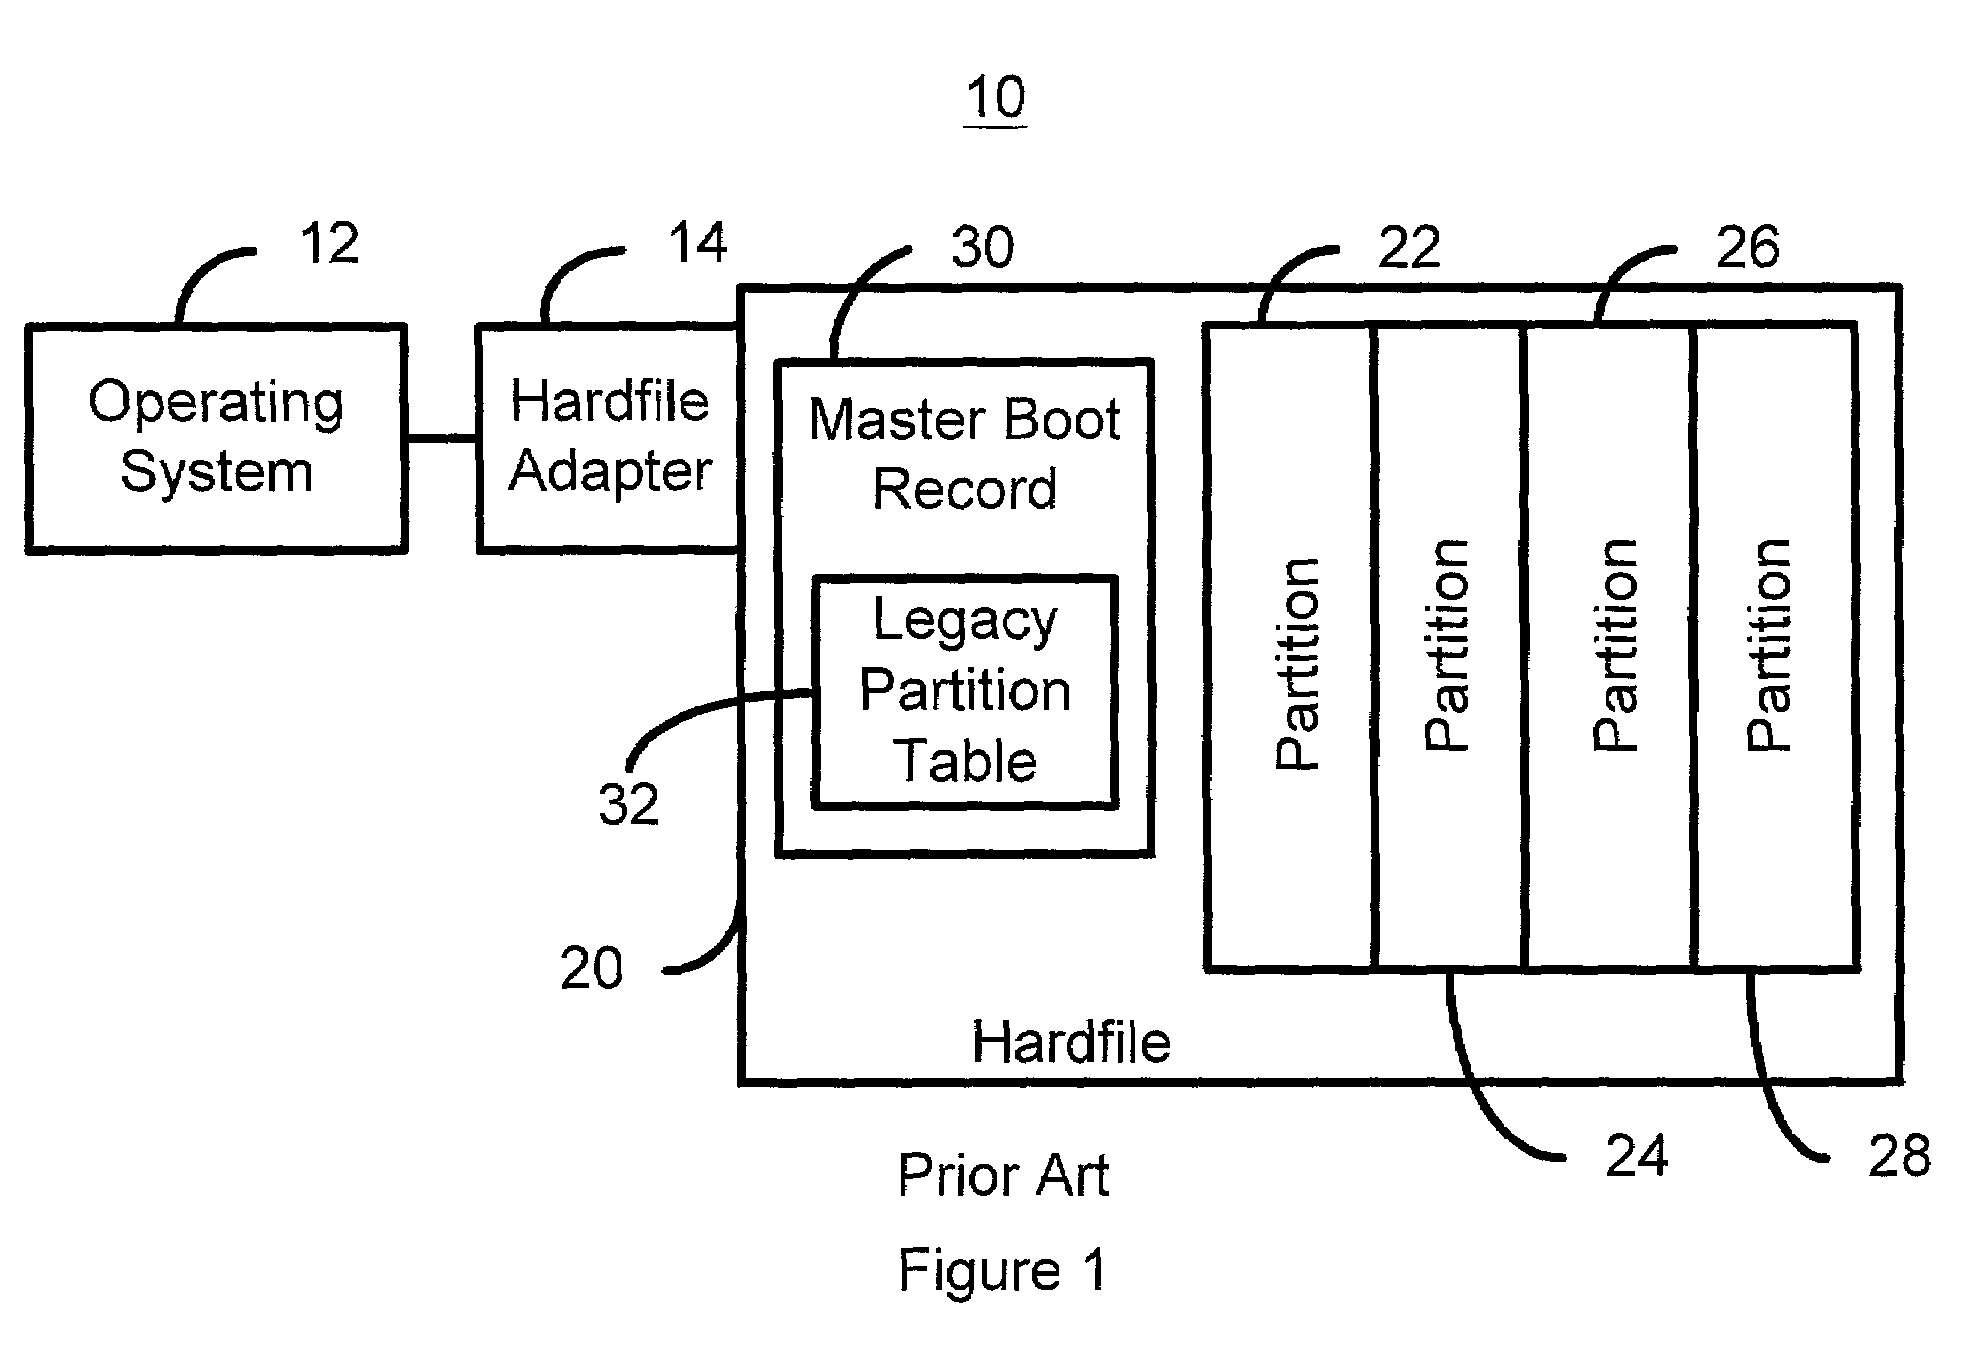 Method and system for providing an event driven image for a boot record